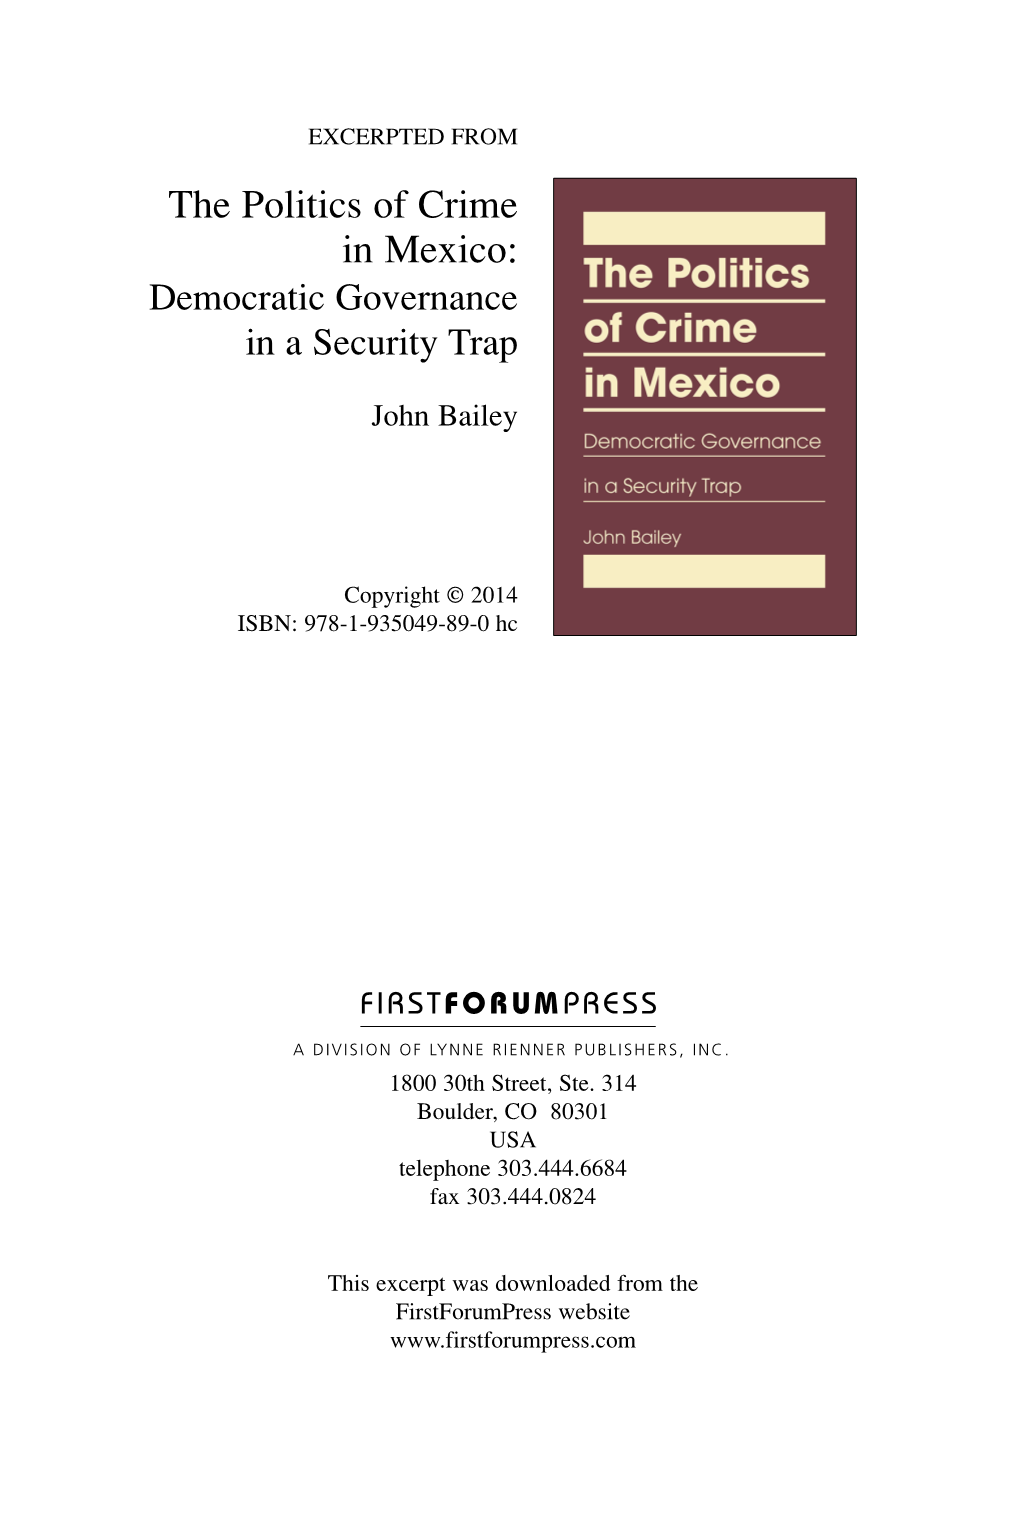 The Politics of Crime in Mexico: Democratic Governance in a Security Trap